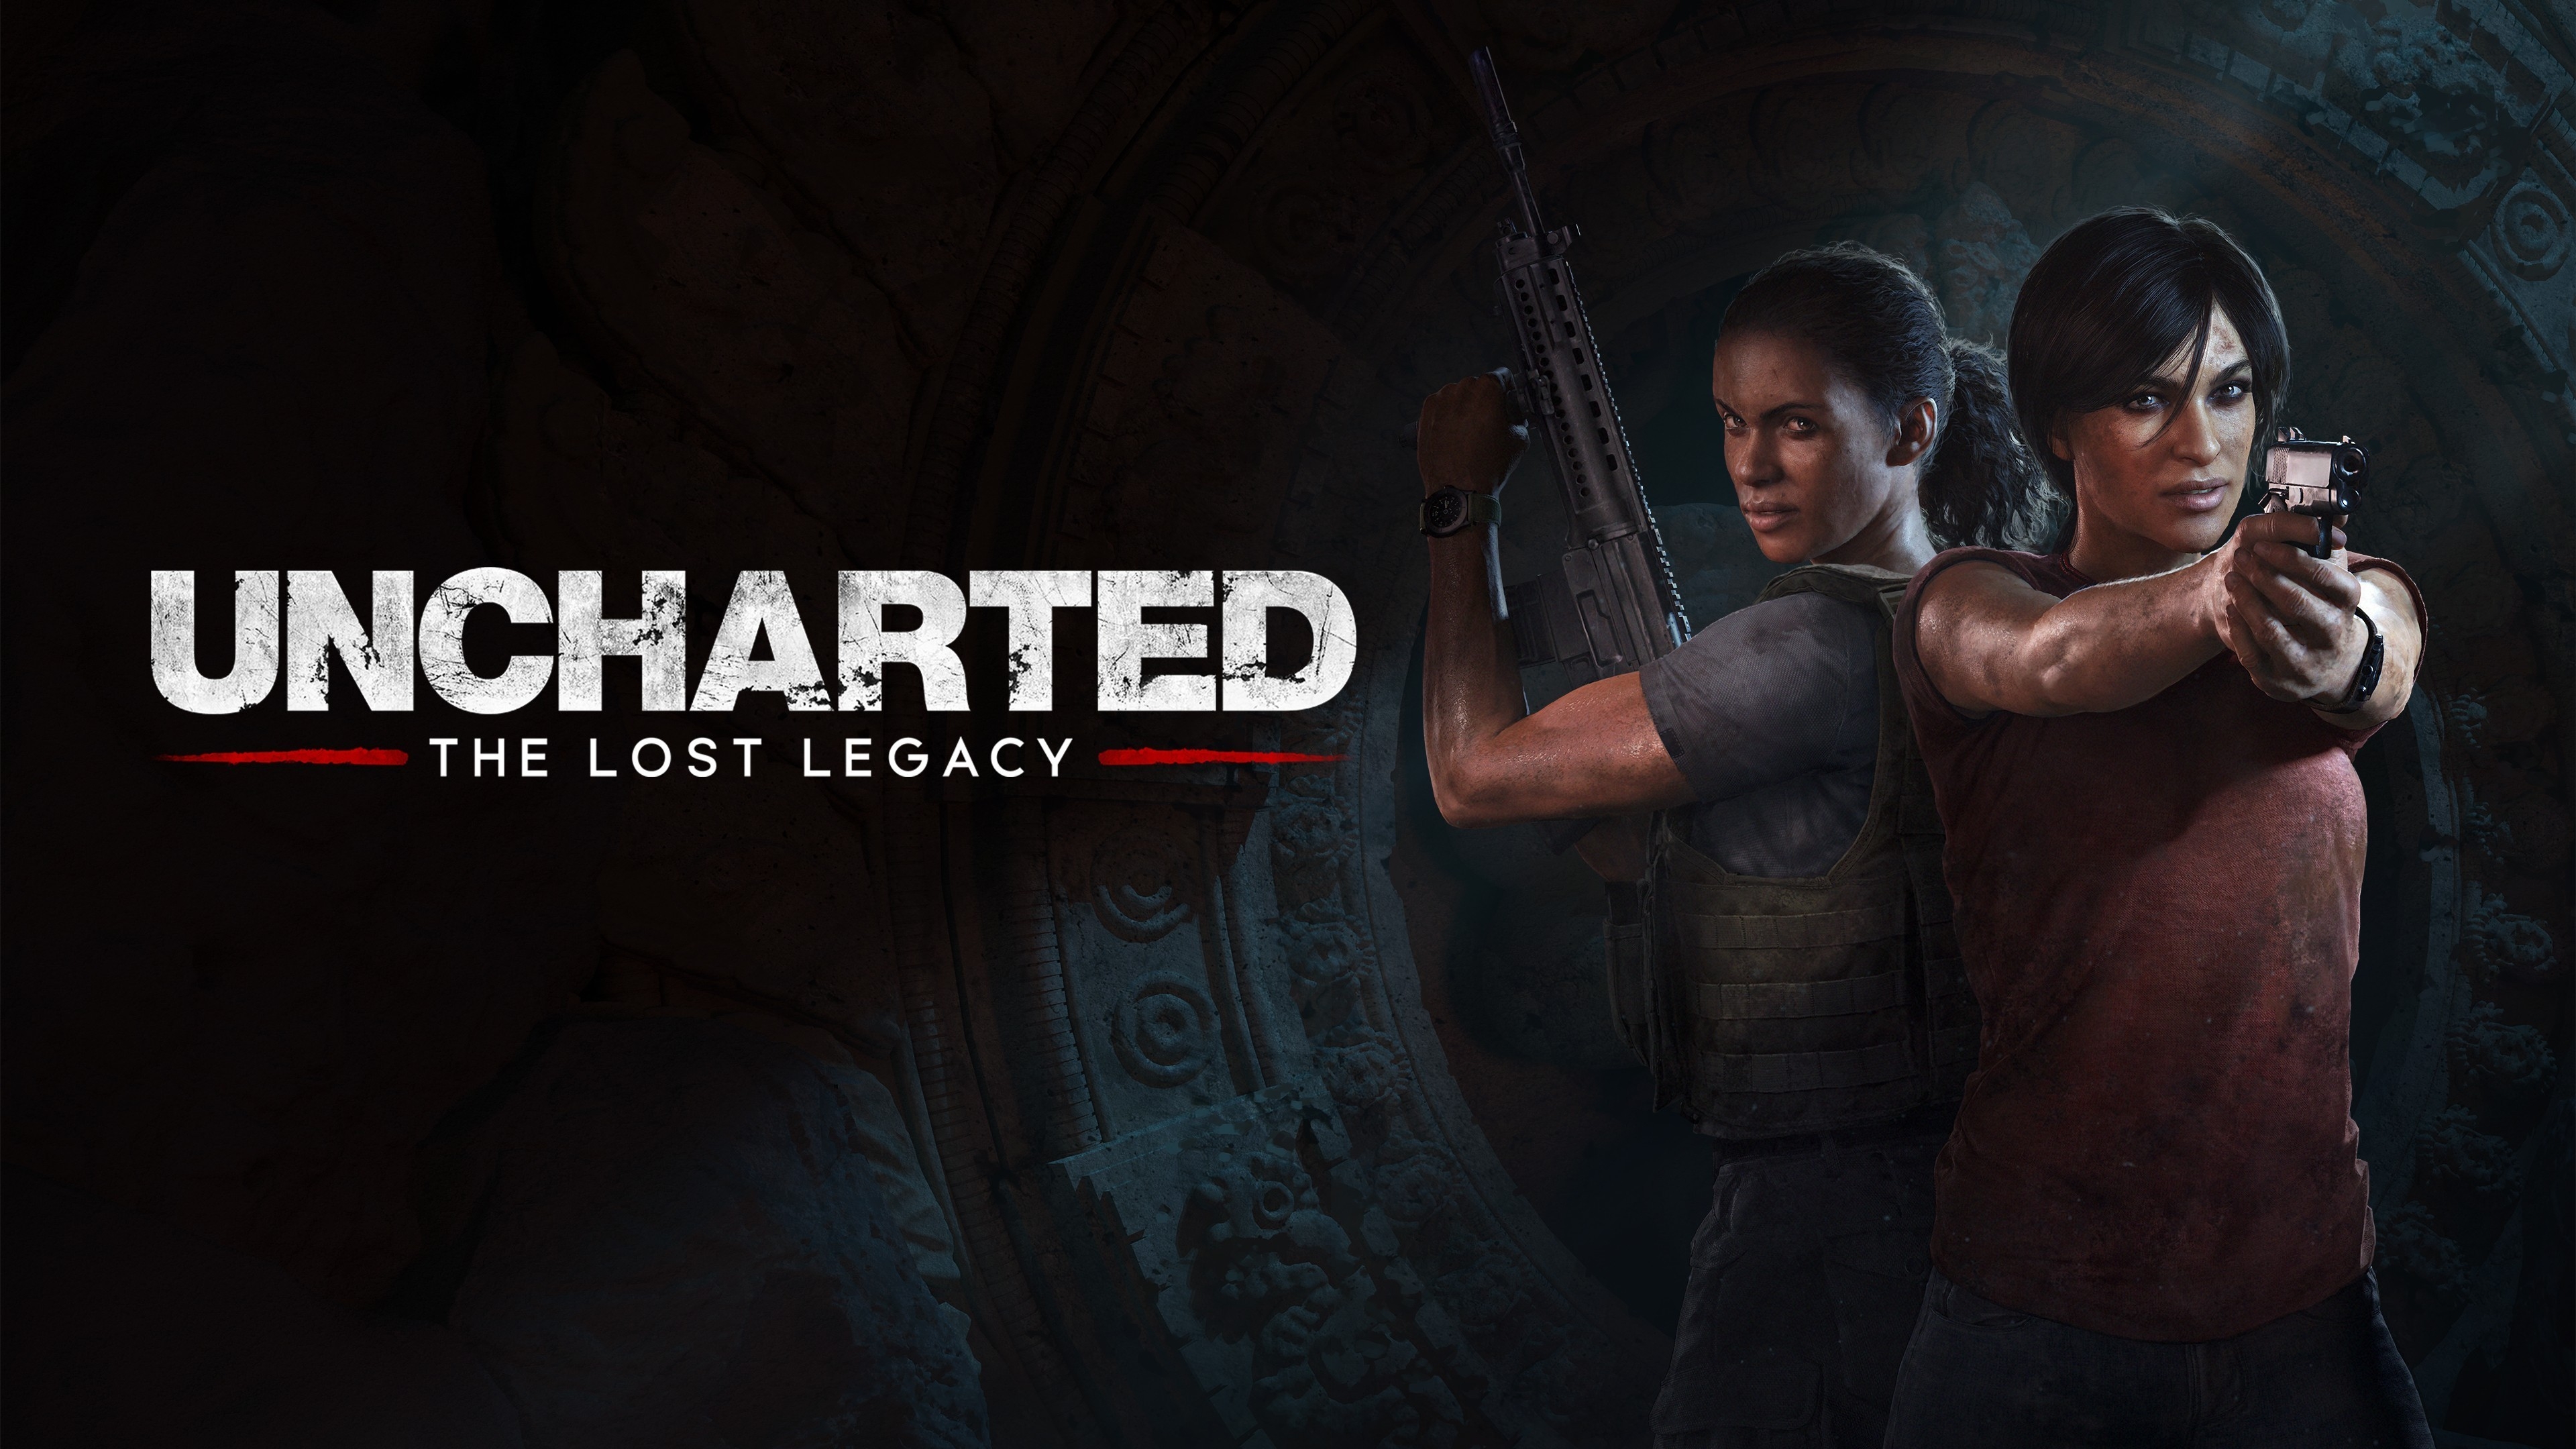 Uncharted The Lost Legacy for 3840 x 2160 Ultra HD resolution